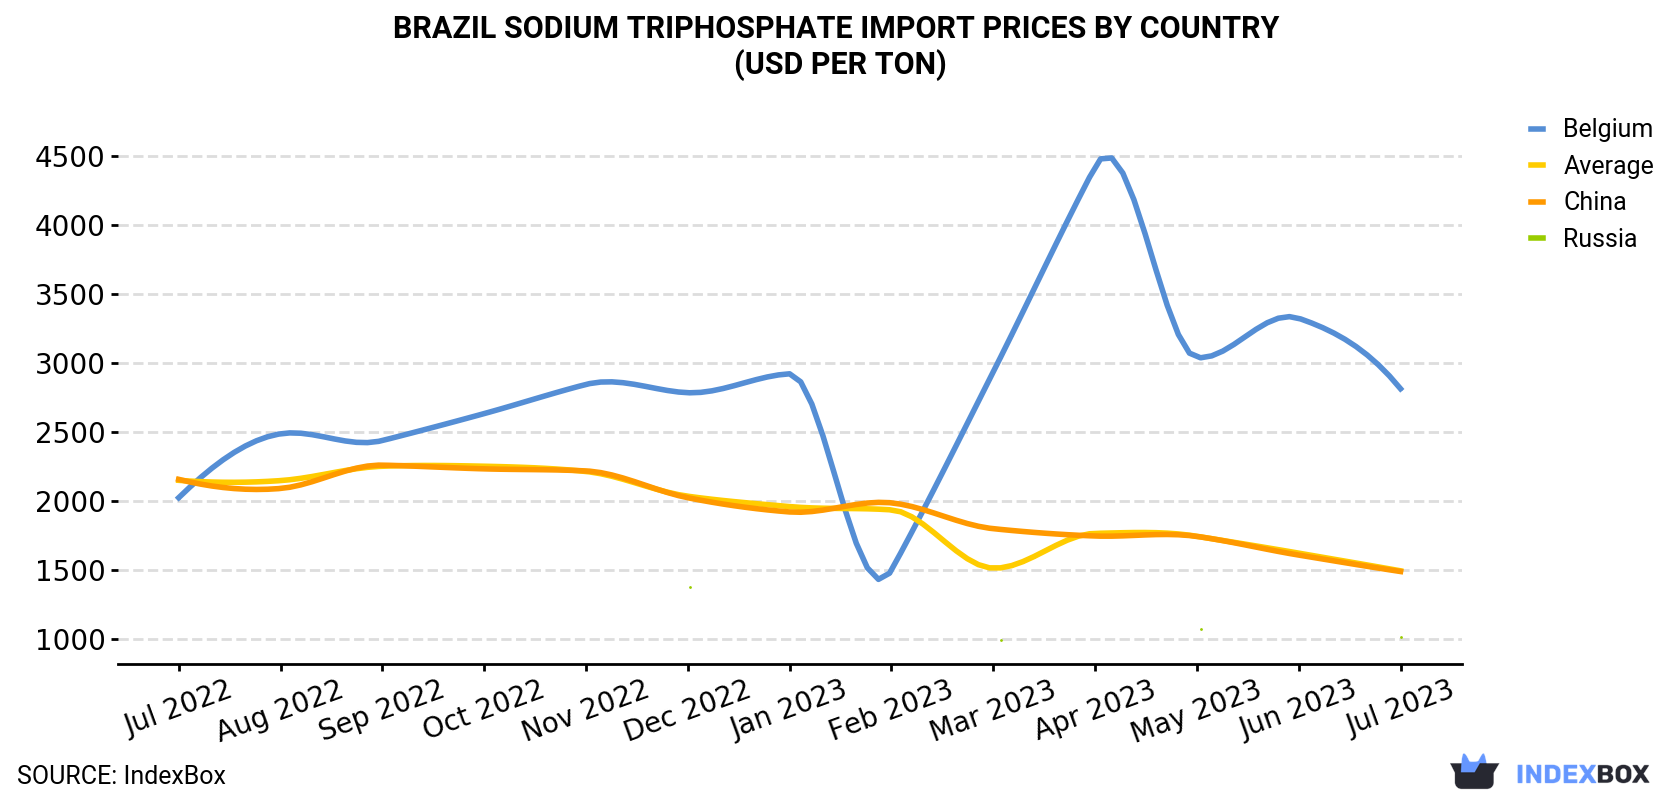 Brazil Sodium Triphosphate Import Prices By Country (USD Per Ton)